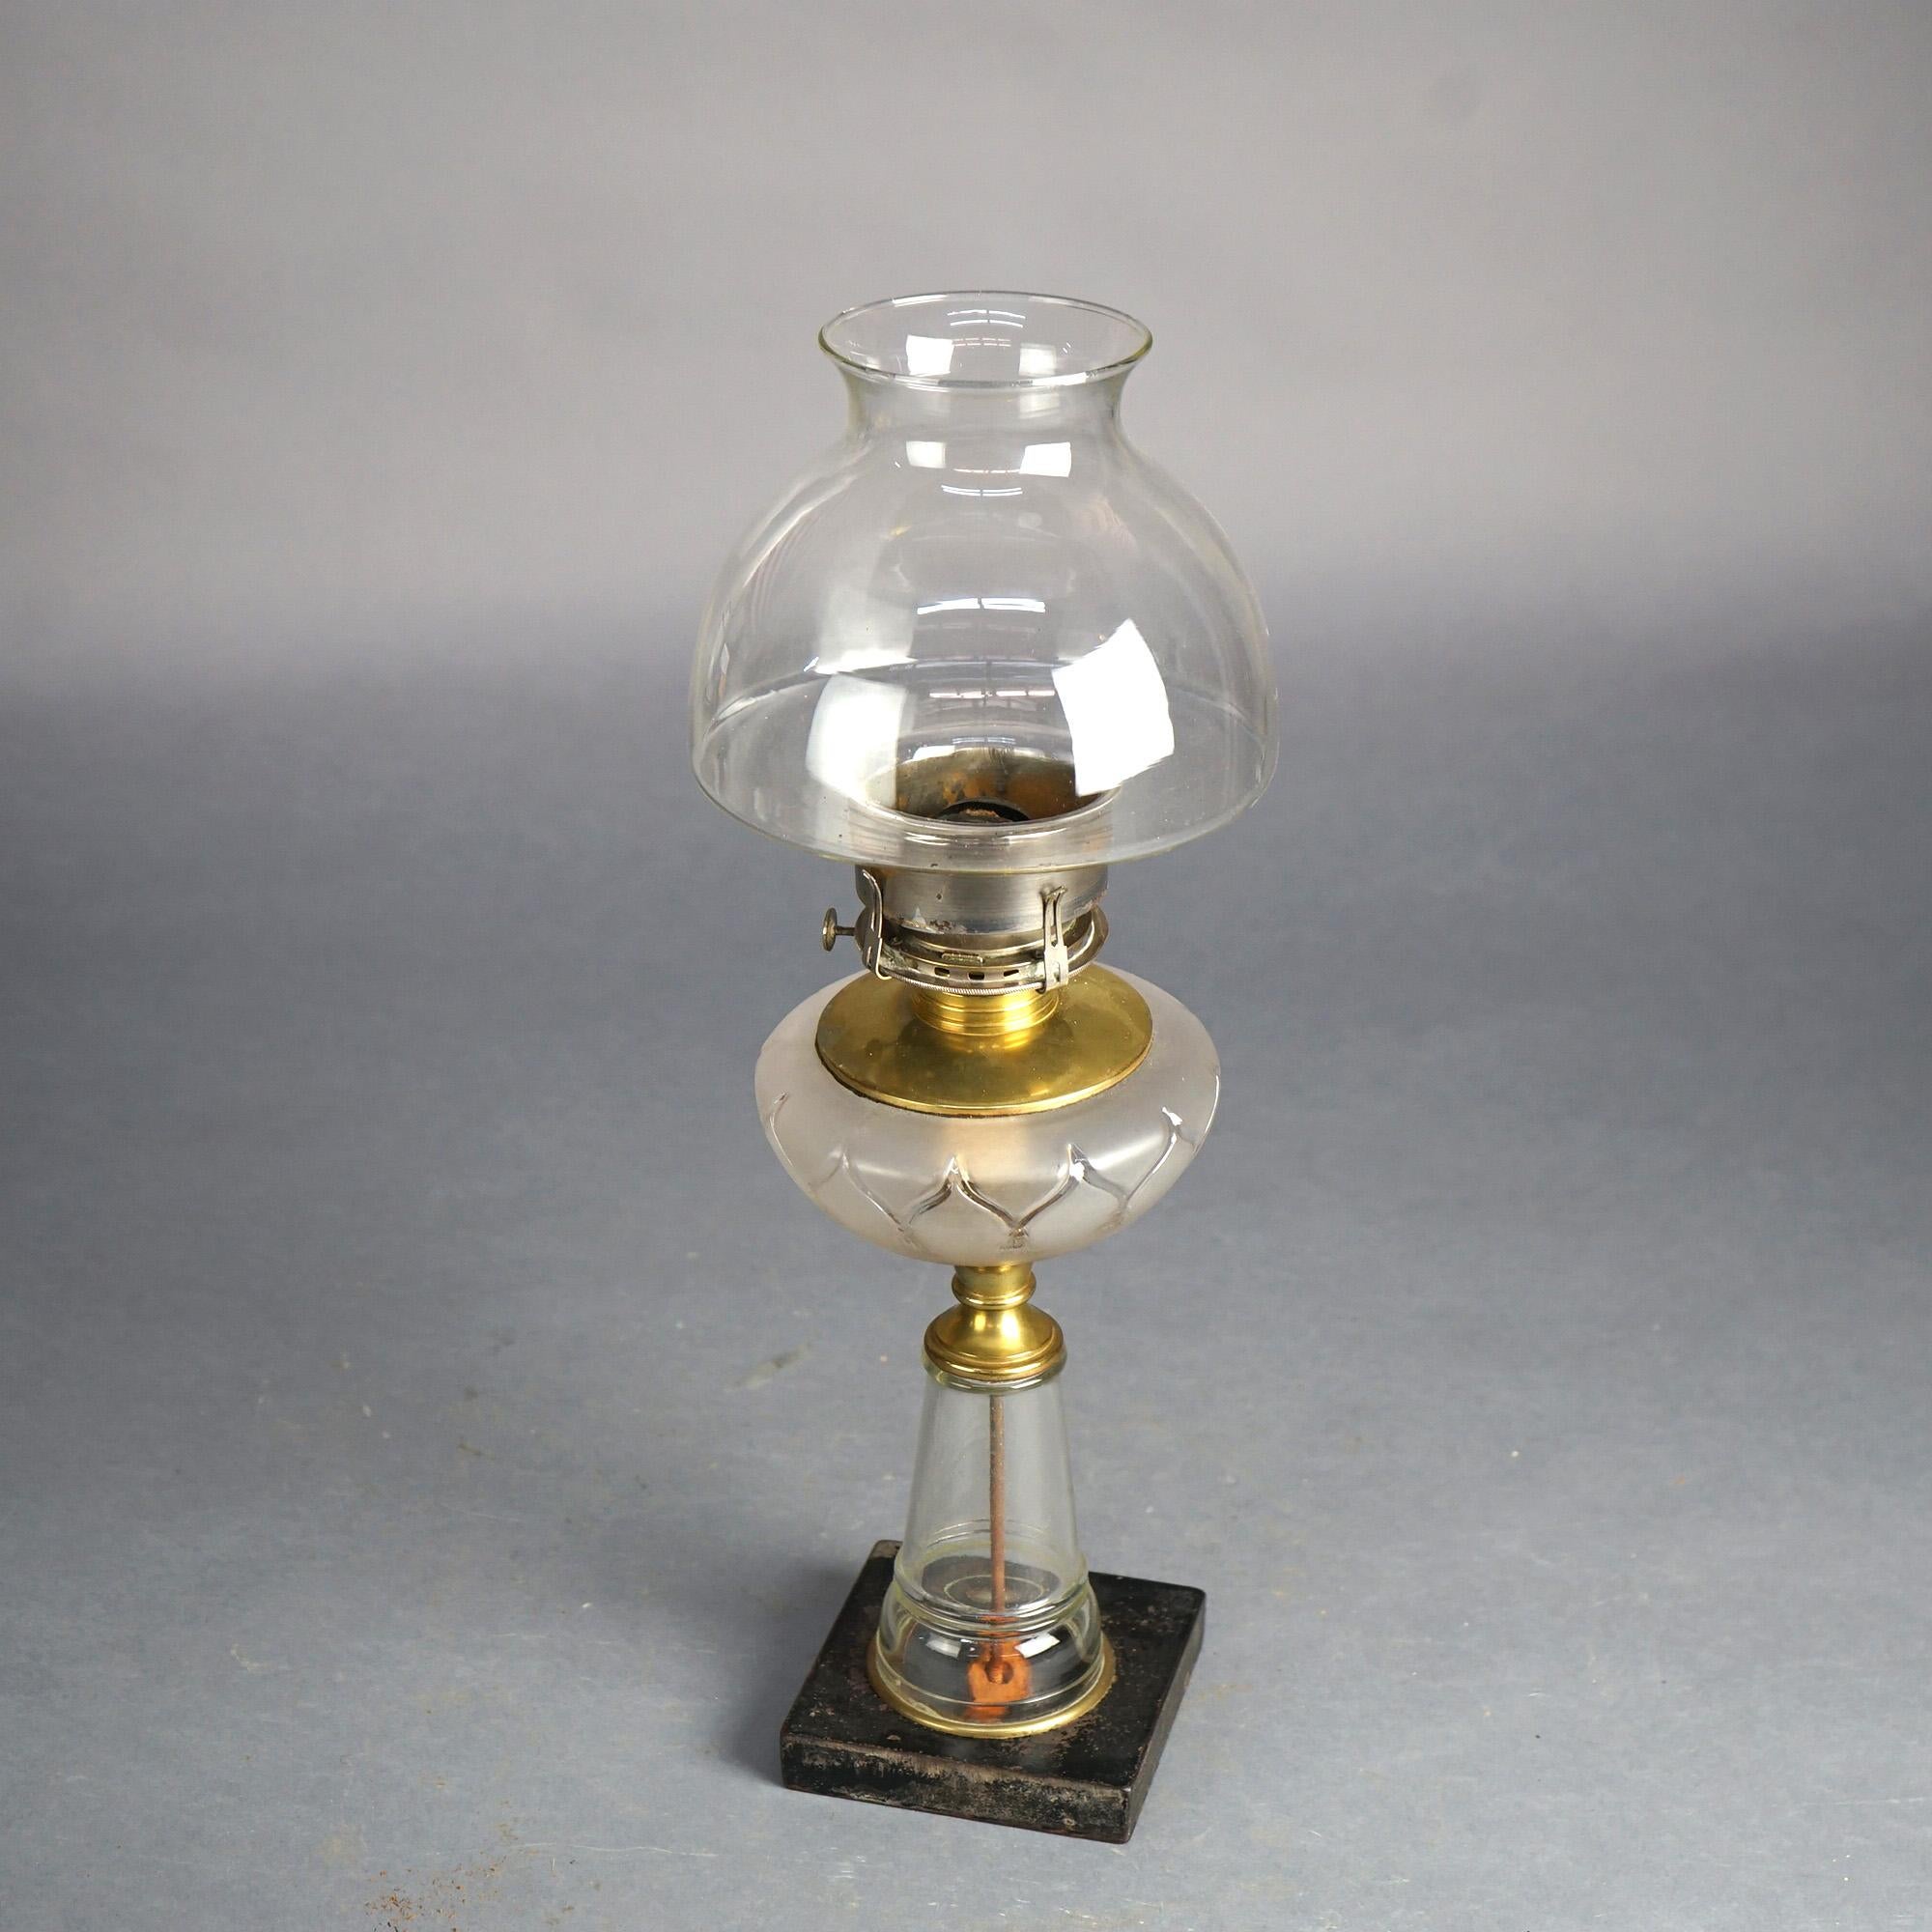 Antique Oil Lamp with Glass Base & Shade C1890

Measures- 19.75''H x 6.75''W x 6.75''D